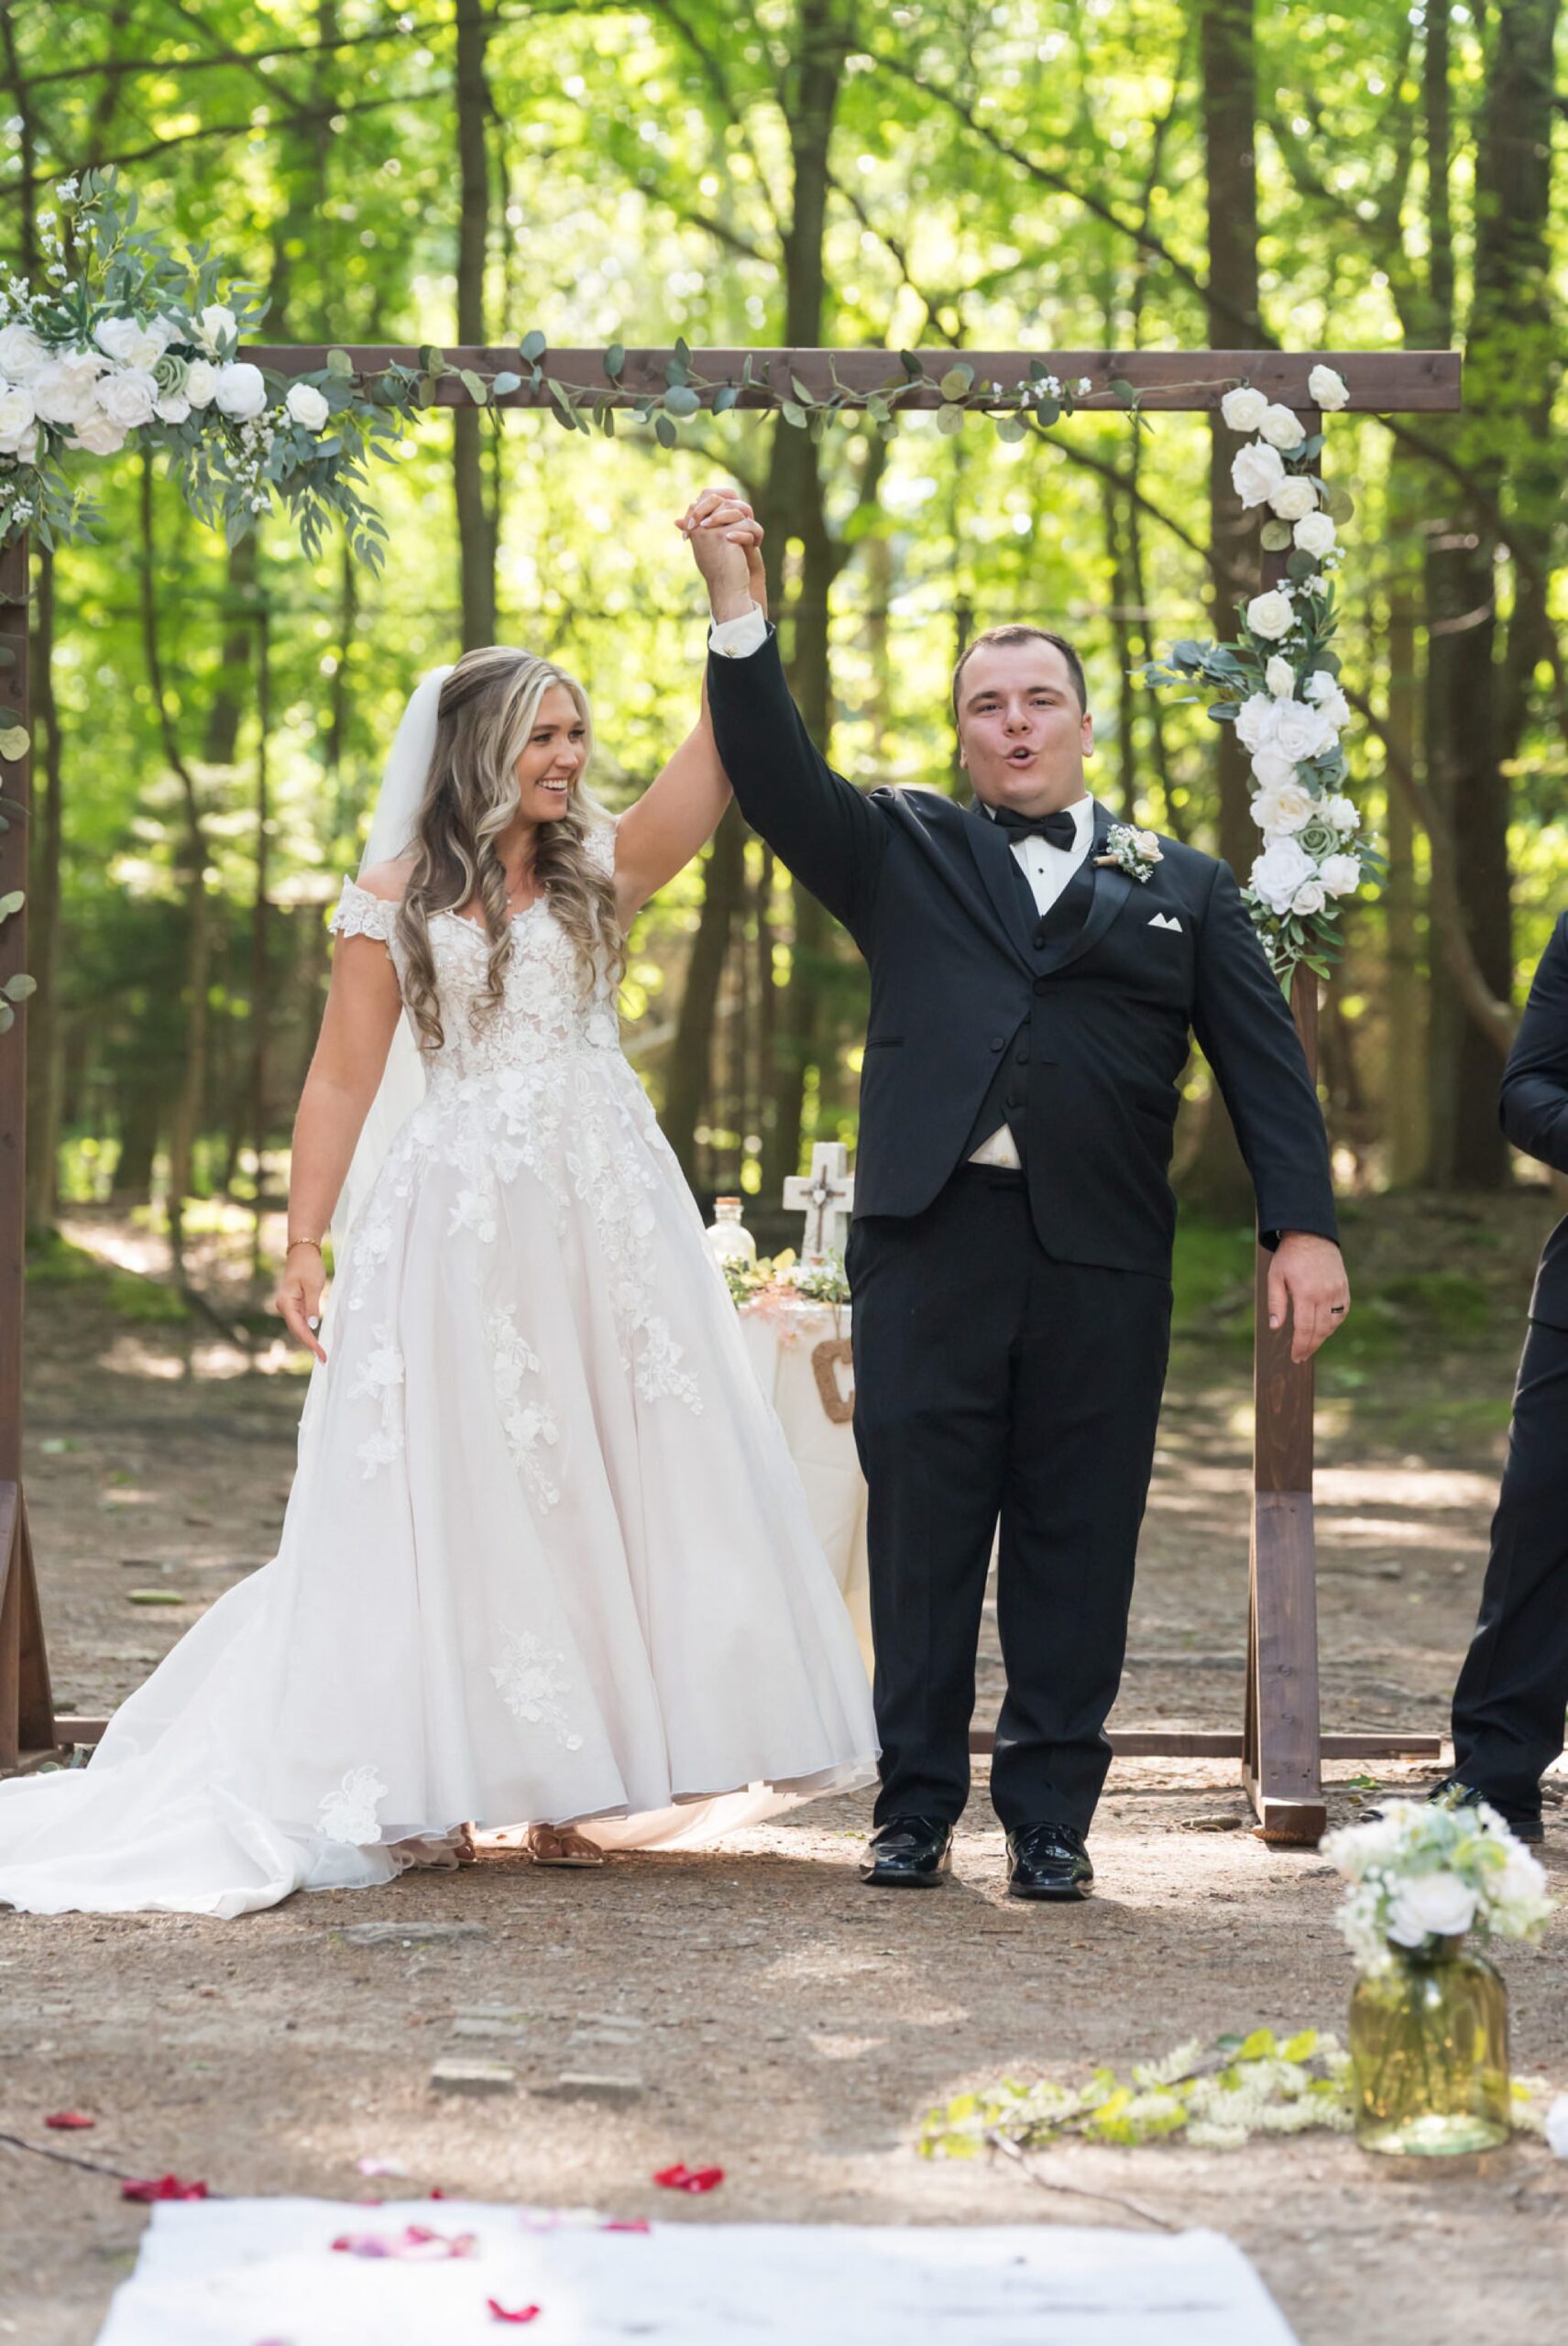 The bride and groom celebrate at their Stony Creek wedding in The Pines.  